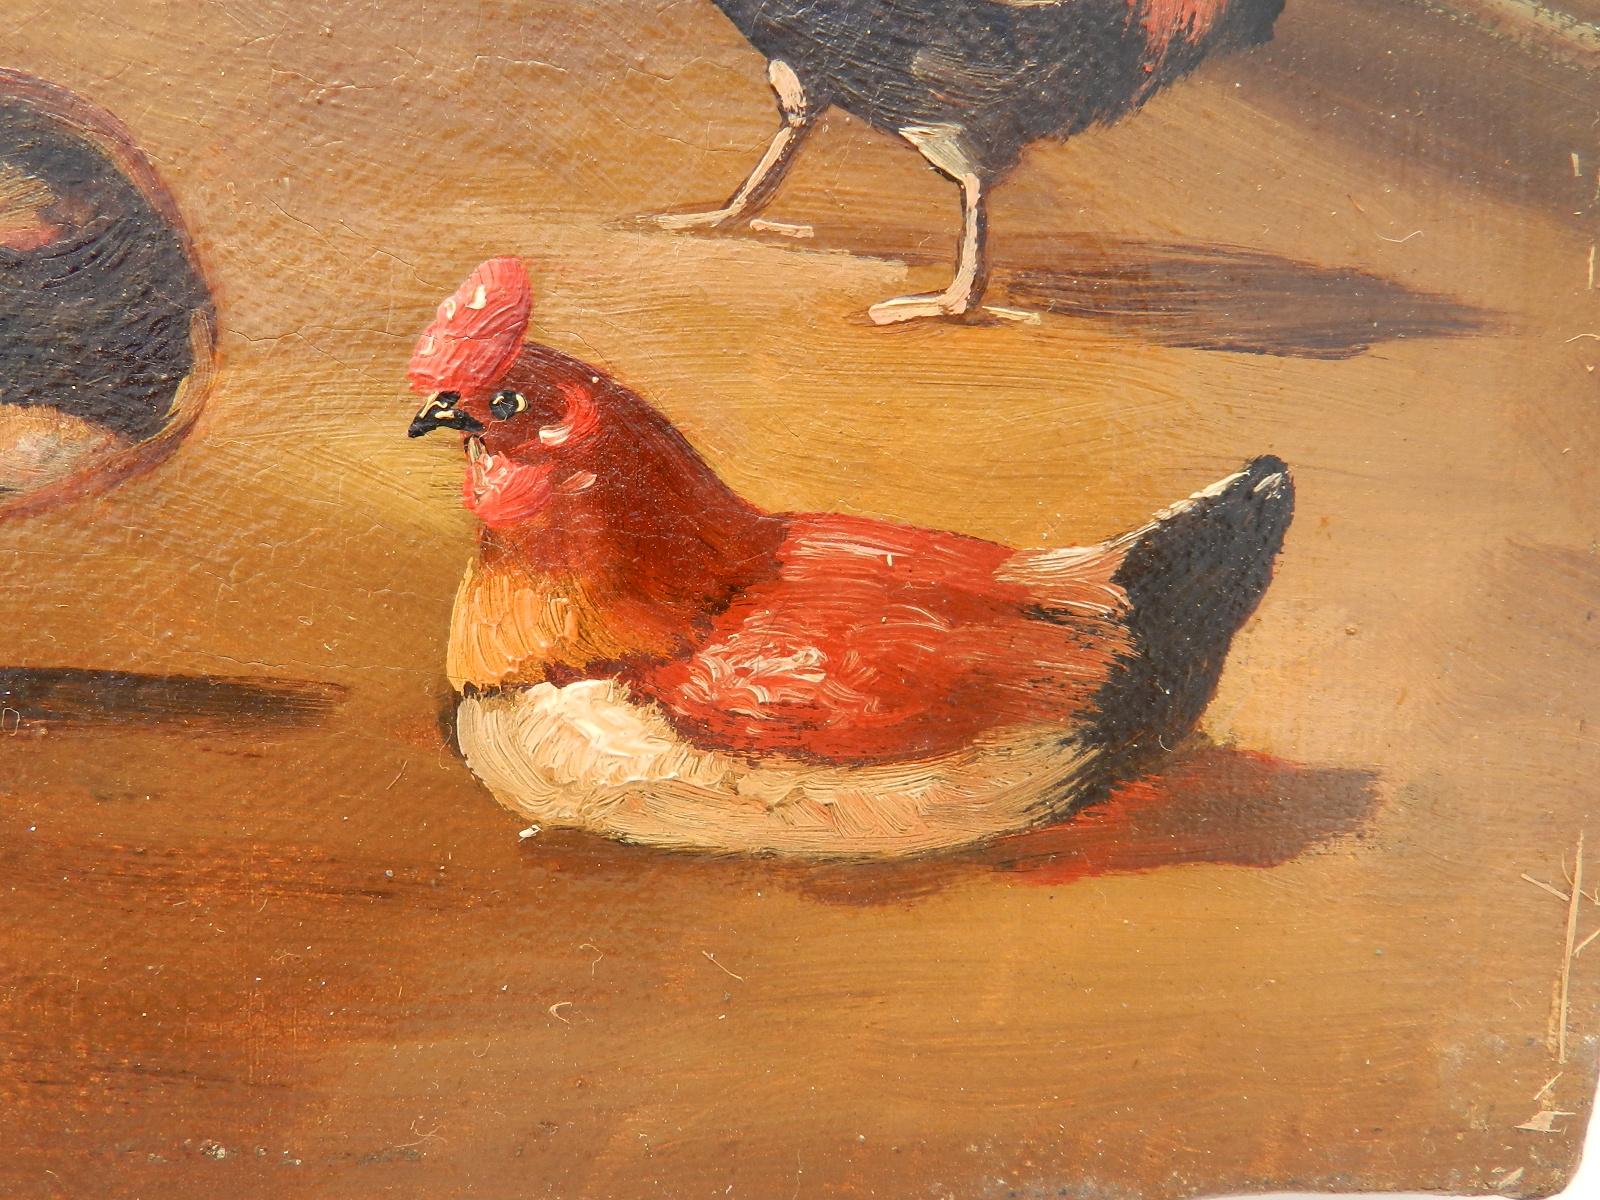 French Farmyard Oil Painting signed Lambert Ducks Chickens French 19th century - Brown Animal Painting by Unknown